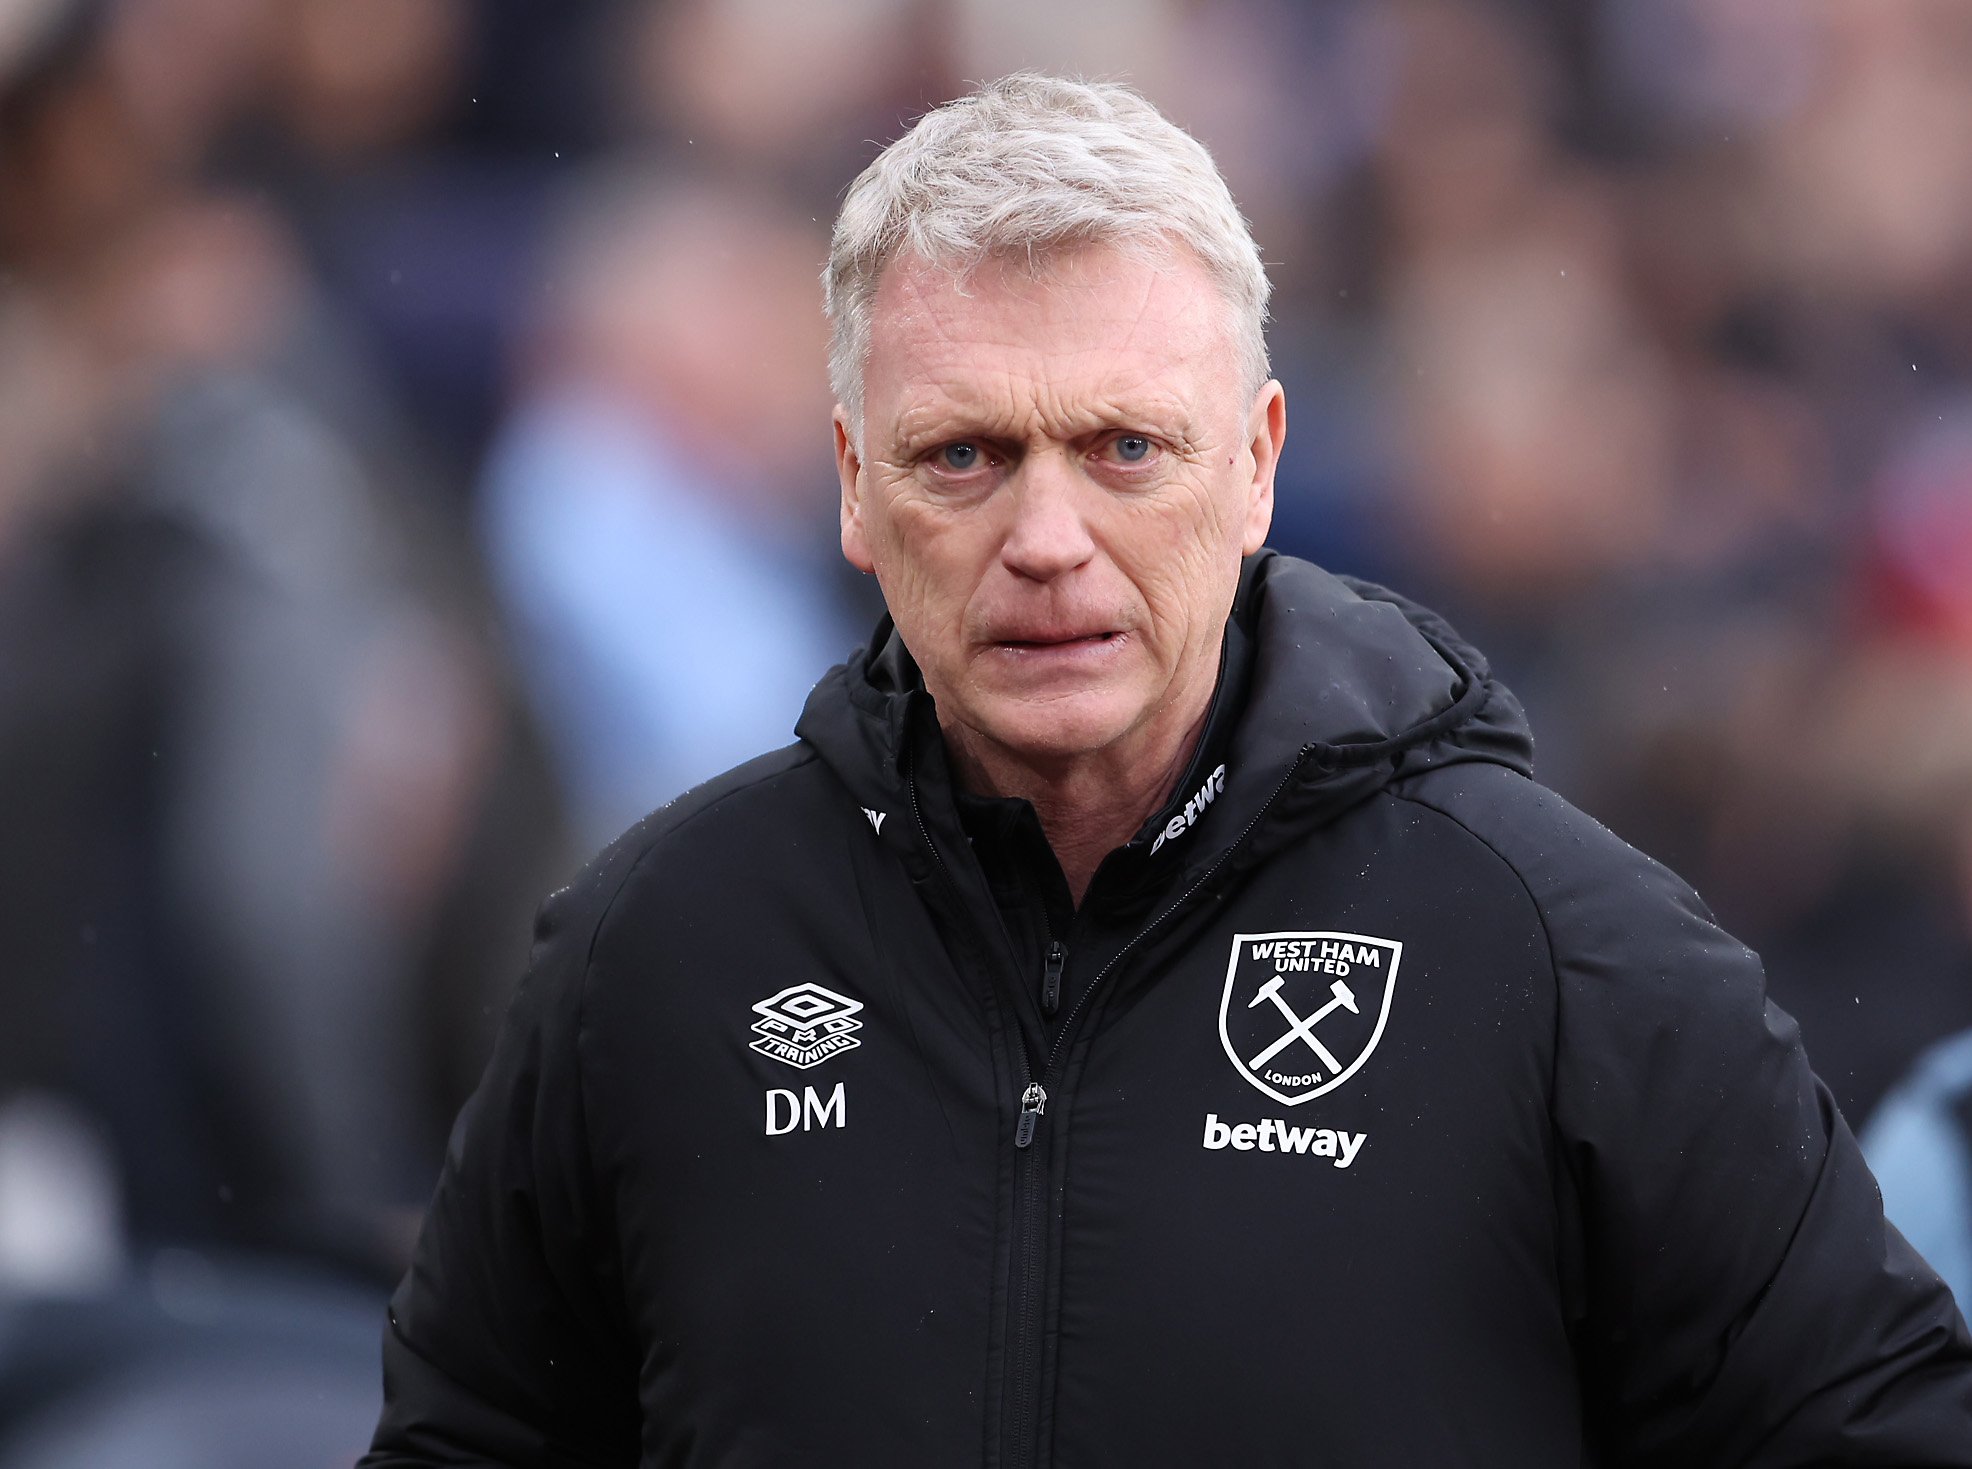 What David Moyes privately told rival boss Ralph Hasenhuttl will infuriate West Ham fans